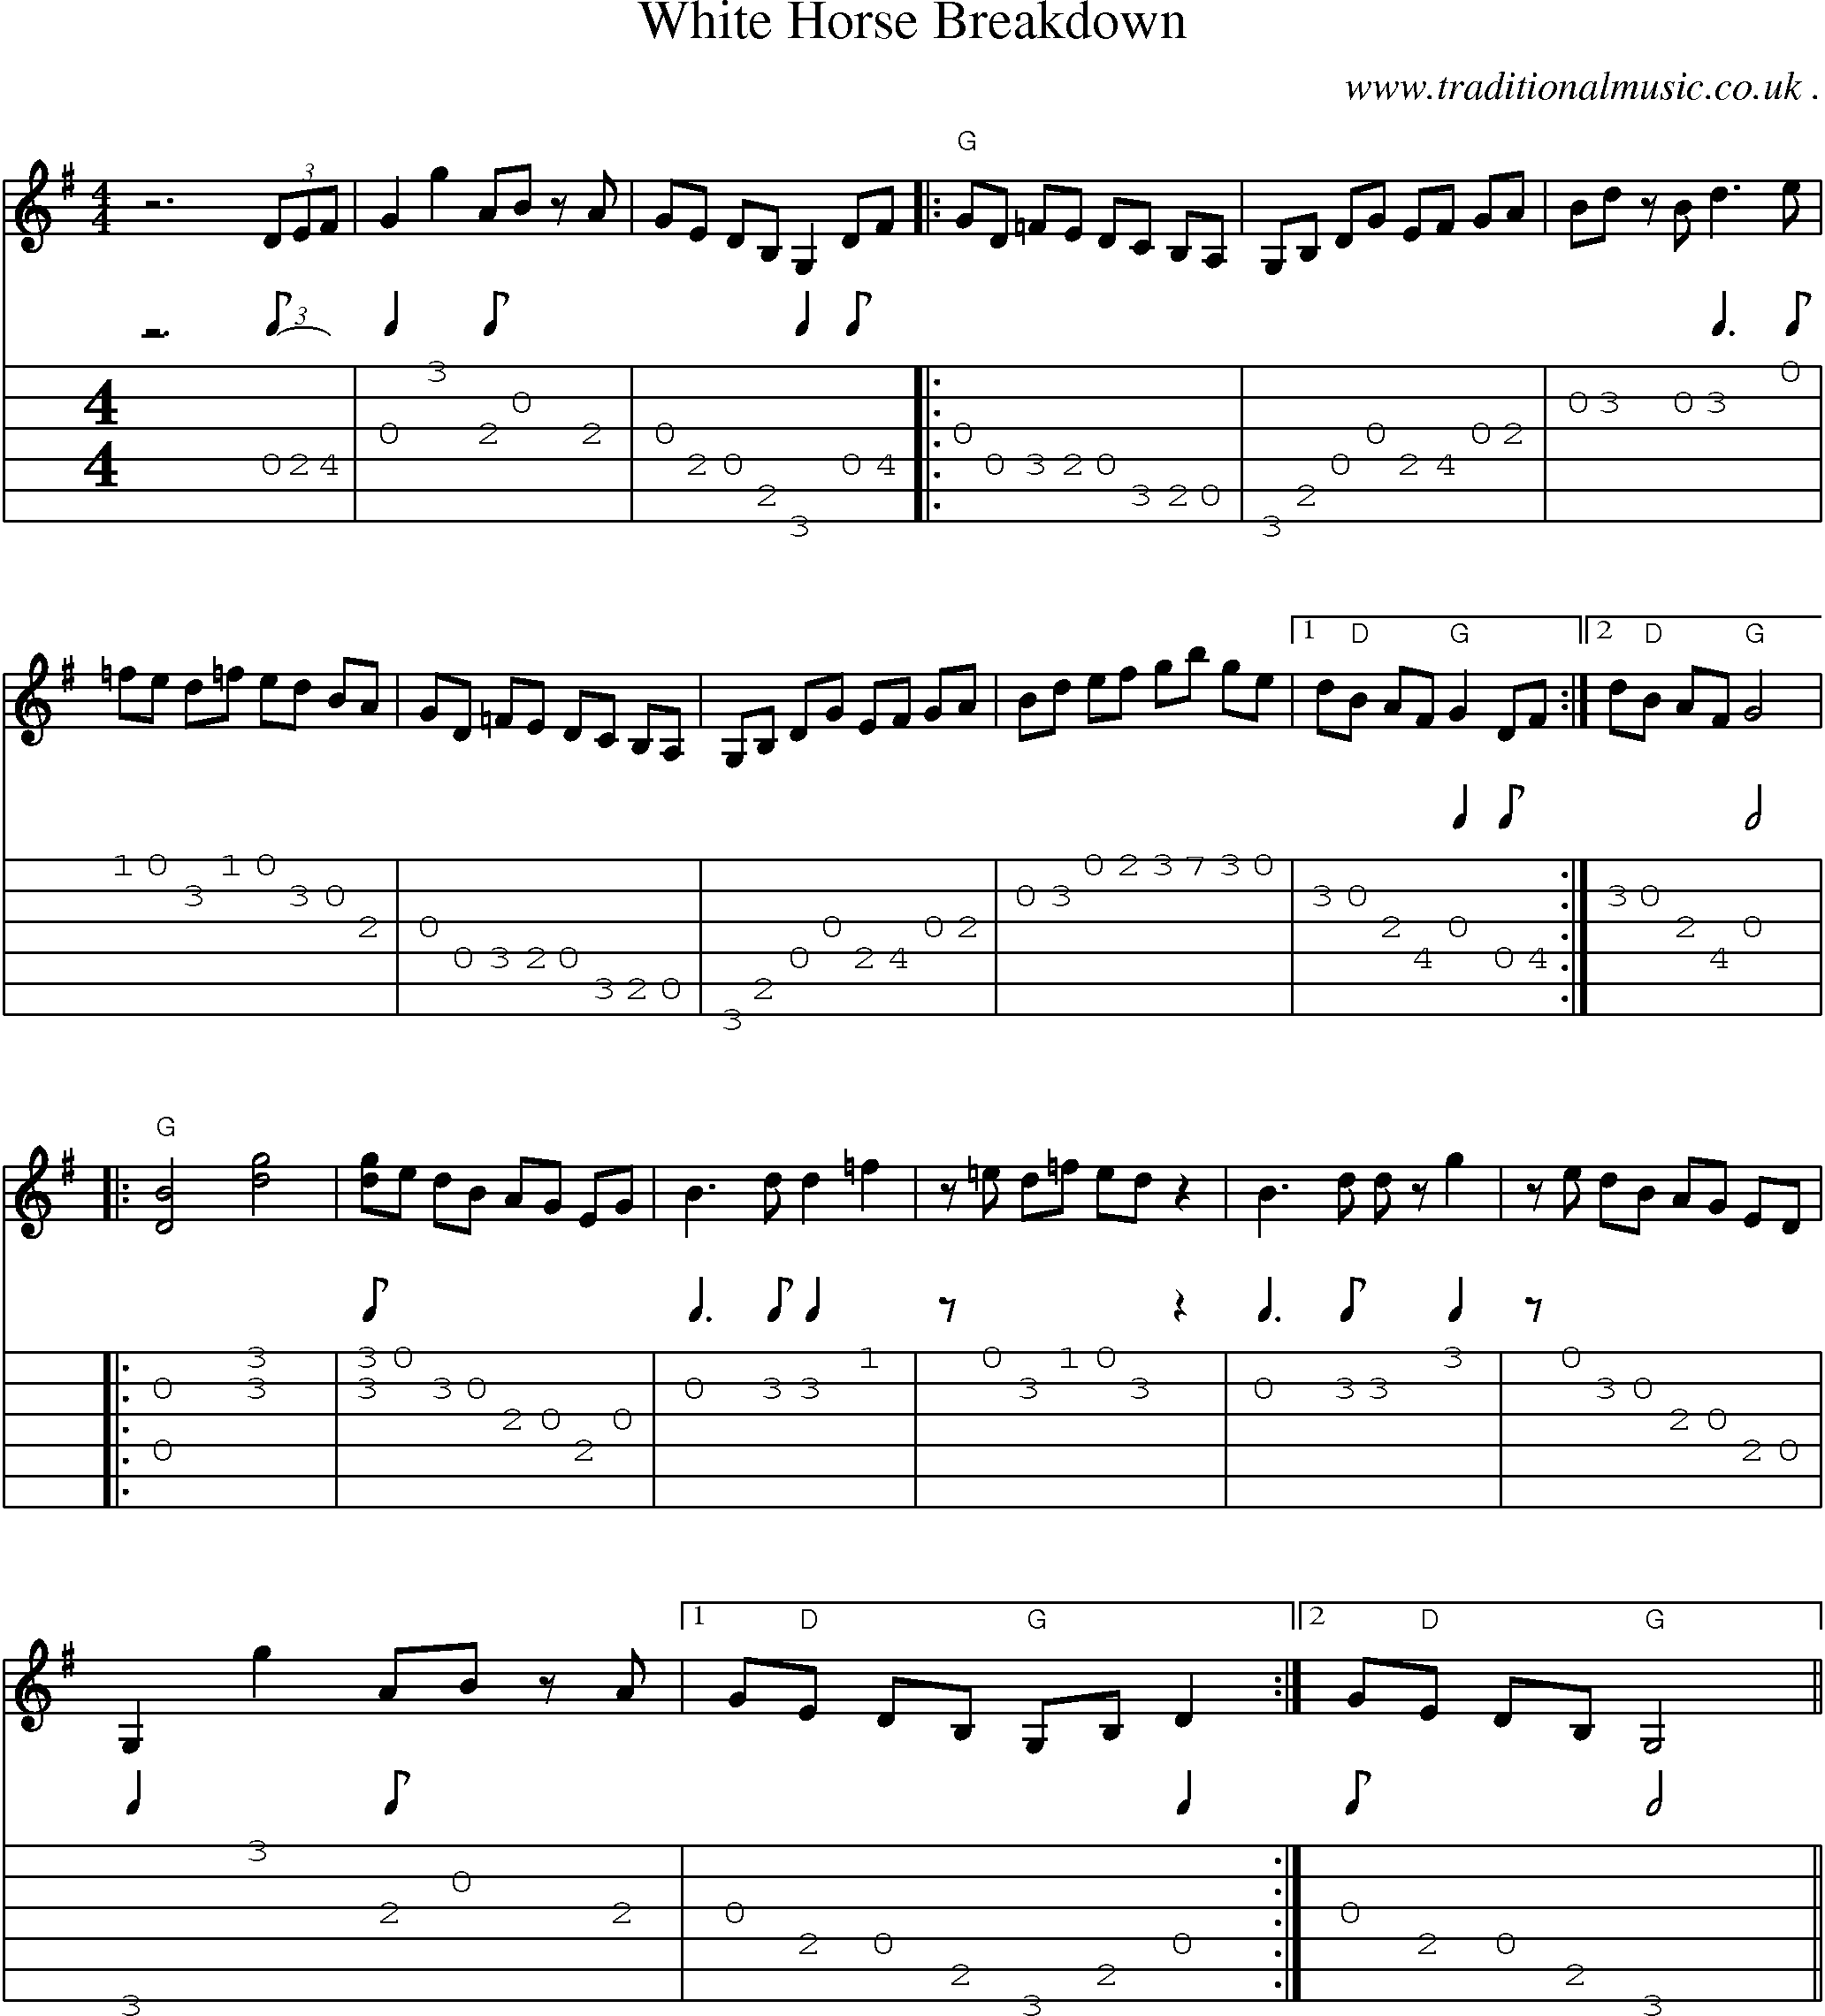 Music Score and Guitar Tabs for White Horse Breakdown